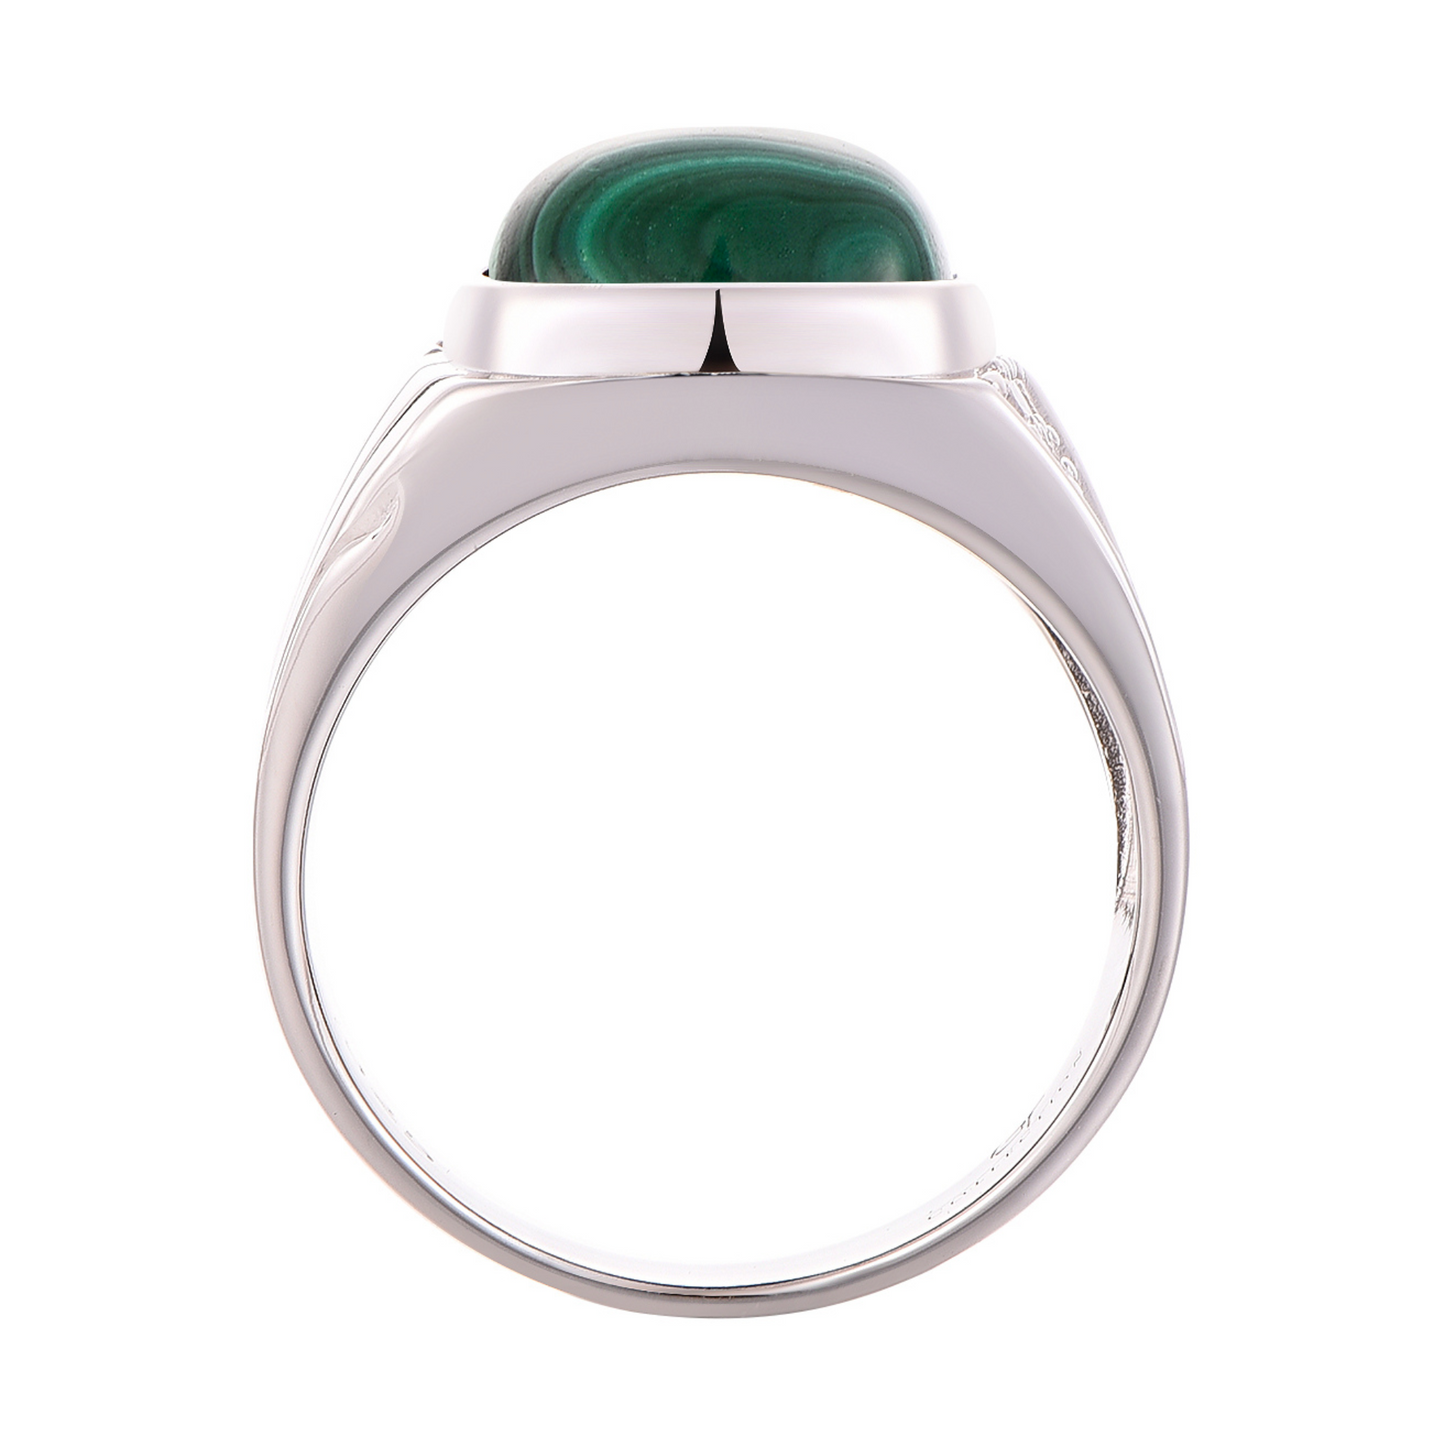 Men's 925 Sterling Silver RING with MALACHITE stone